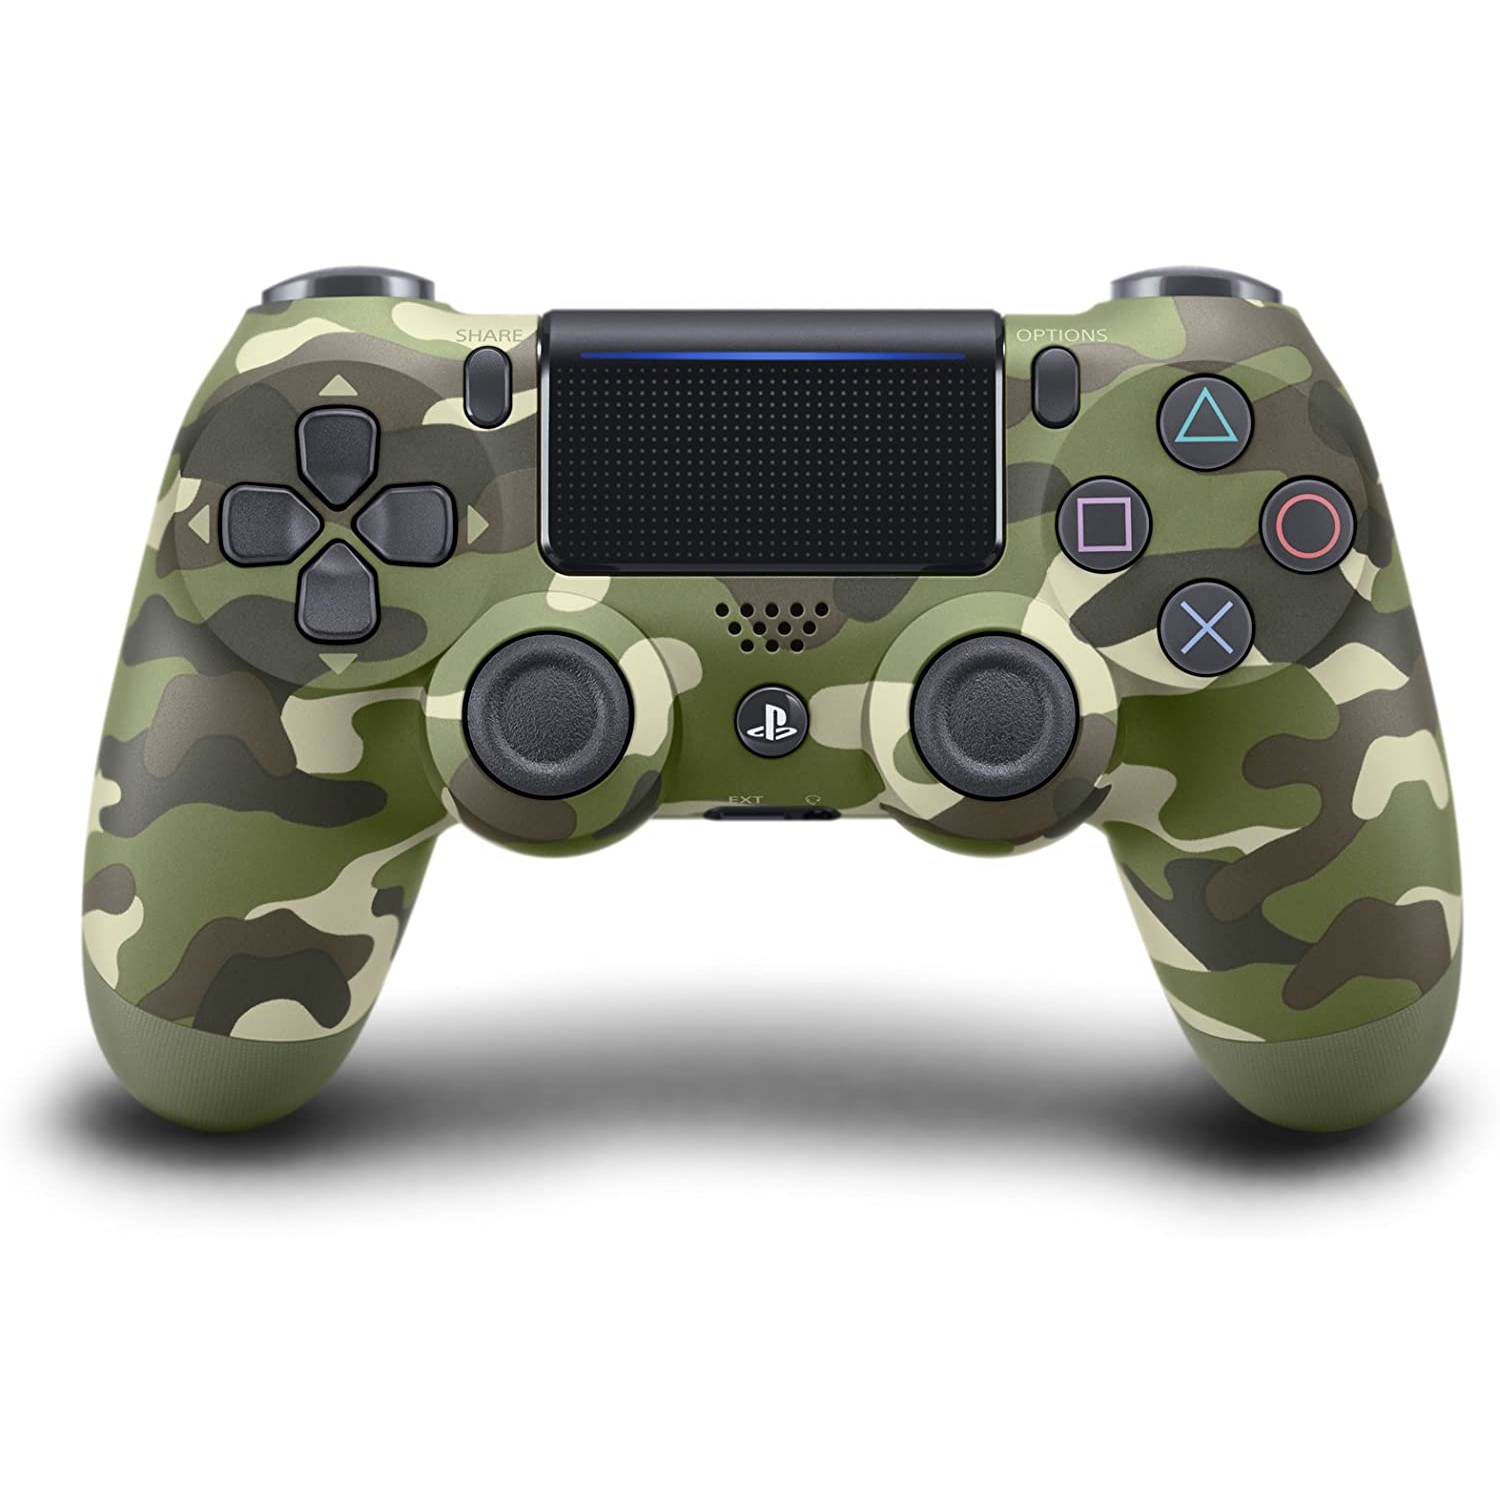 Open Box - PS4 DualShock 4 Wireless Controller - Green/Camouflage